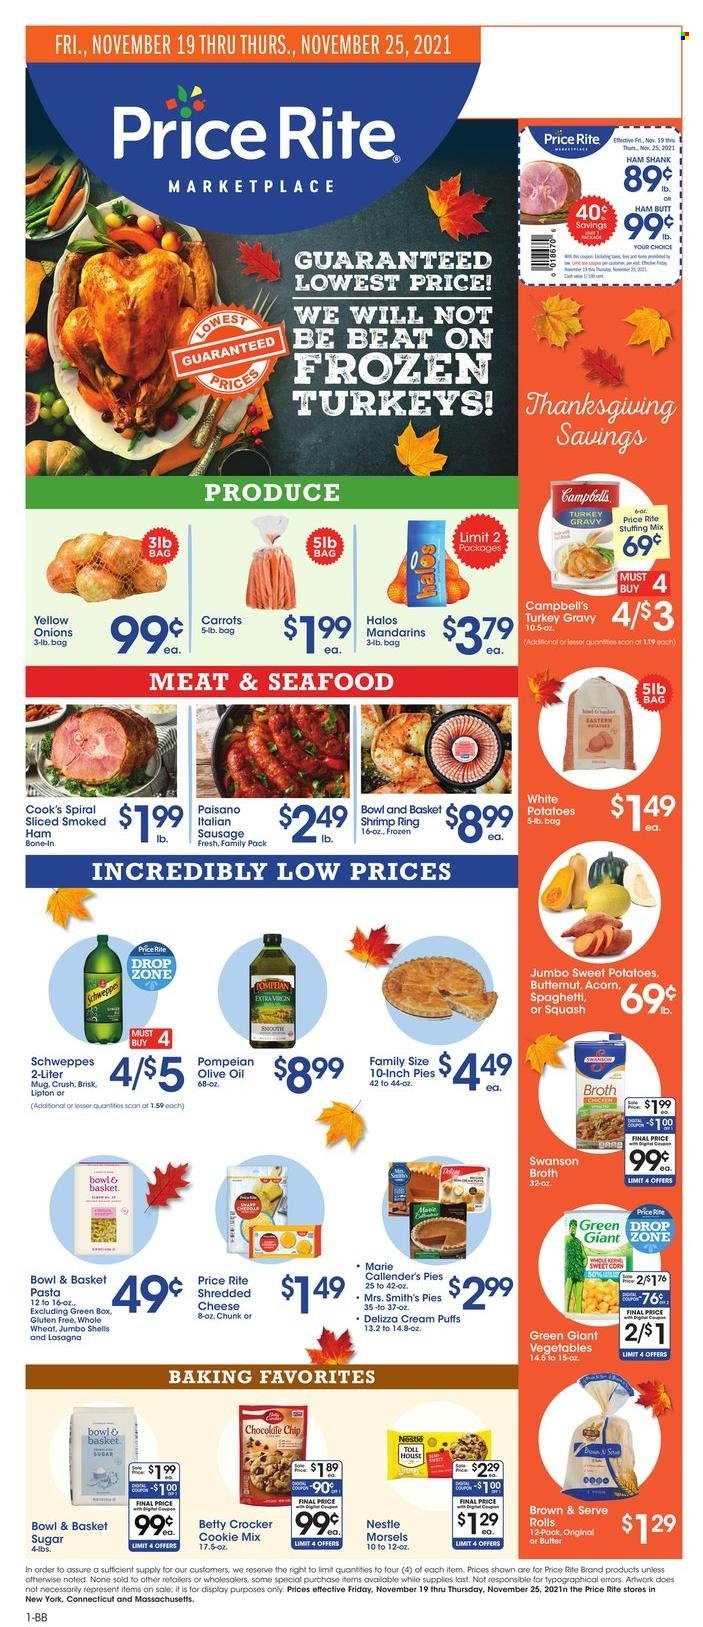 thumbnail - Price Rite Flyer - 11/19/2021 - 11/25/2021 - Sales products - Bowl & Basket, puffs, cream puffs, carrots, sweet potato, potatoes, onion, mandarines, seafood, shrimps, Campbell's, spaghetti, pasta, Marie Callender's, ham, ham shank, smoked ham, Cook's, sausage, italian sausage, shredded cheese, butter, Nestlé, Smith's, stuffing mix, sugar, broth, turkey gravy, olive oil, oil, Schweppes, Lipton, butternut squash. Page 1.